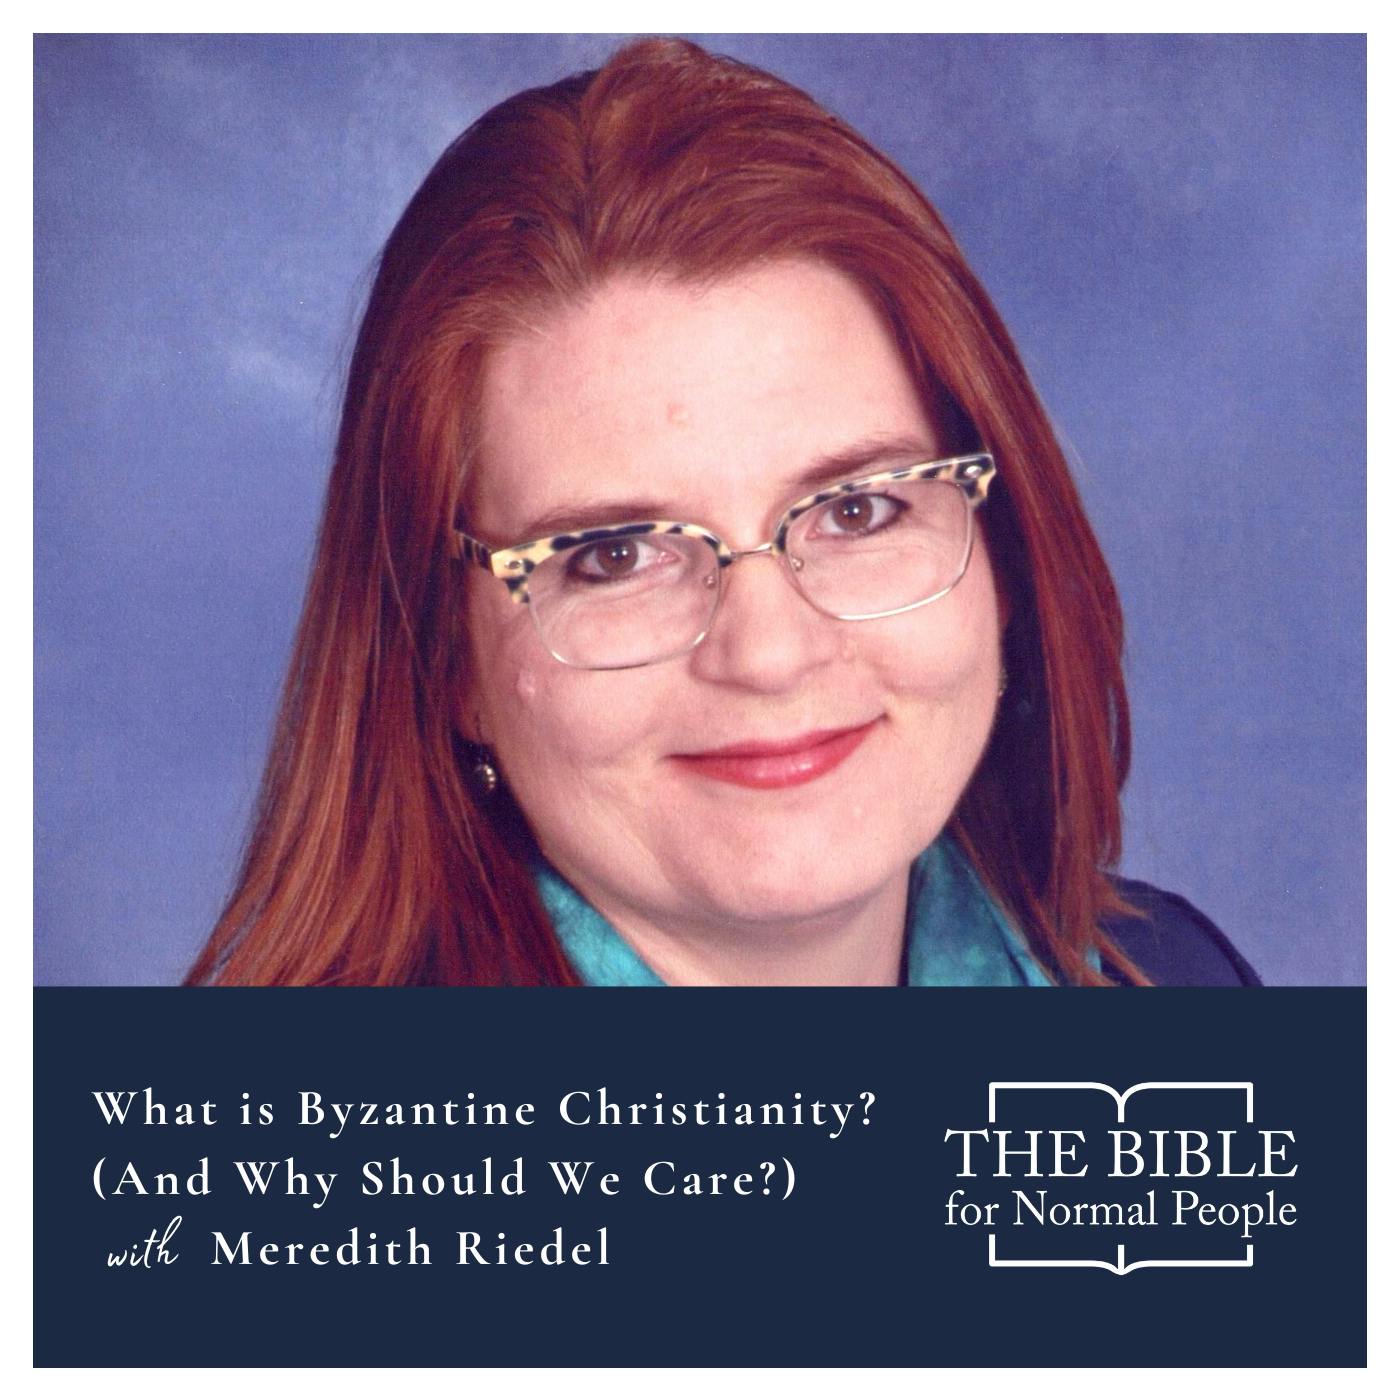 Episode 226: Meredith Riedel - What is Byzantine Christianity? (And Why Should We Care?)